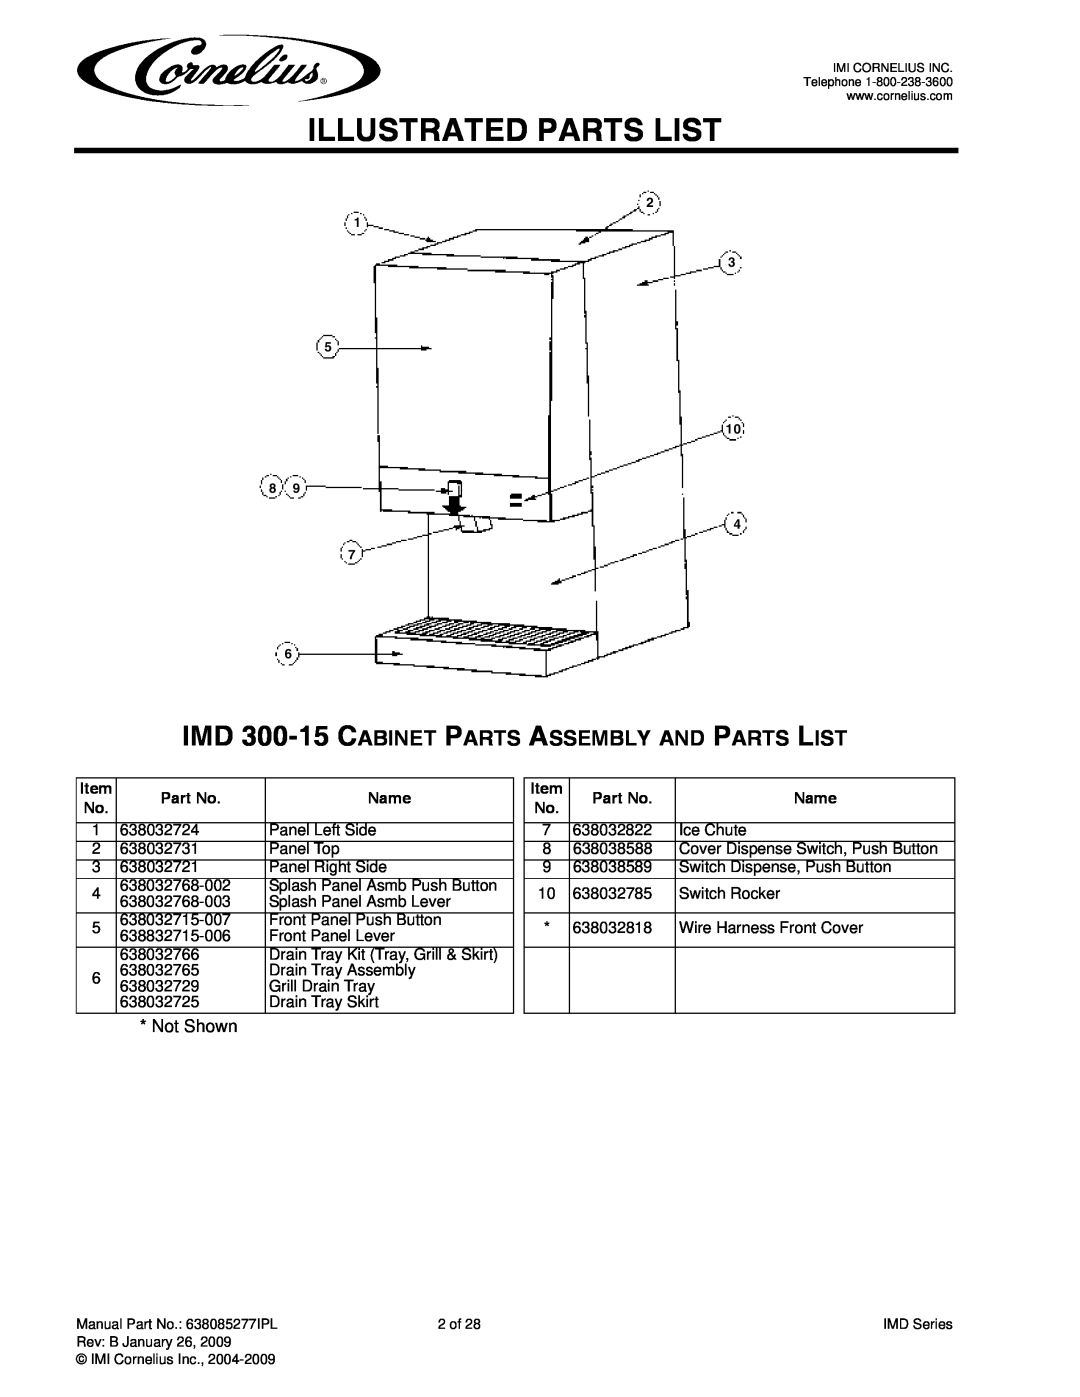 Cornelius IMD600-90, IMD600-30 manual IMD 300-15CABINET PARTS ASSEMBLY AND PARTS LIST, Not Shown, Illustrated Parts List 